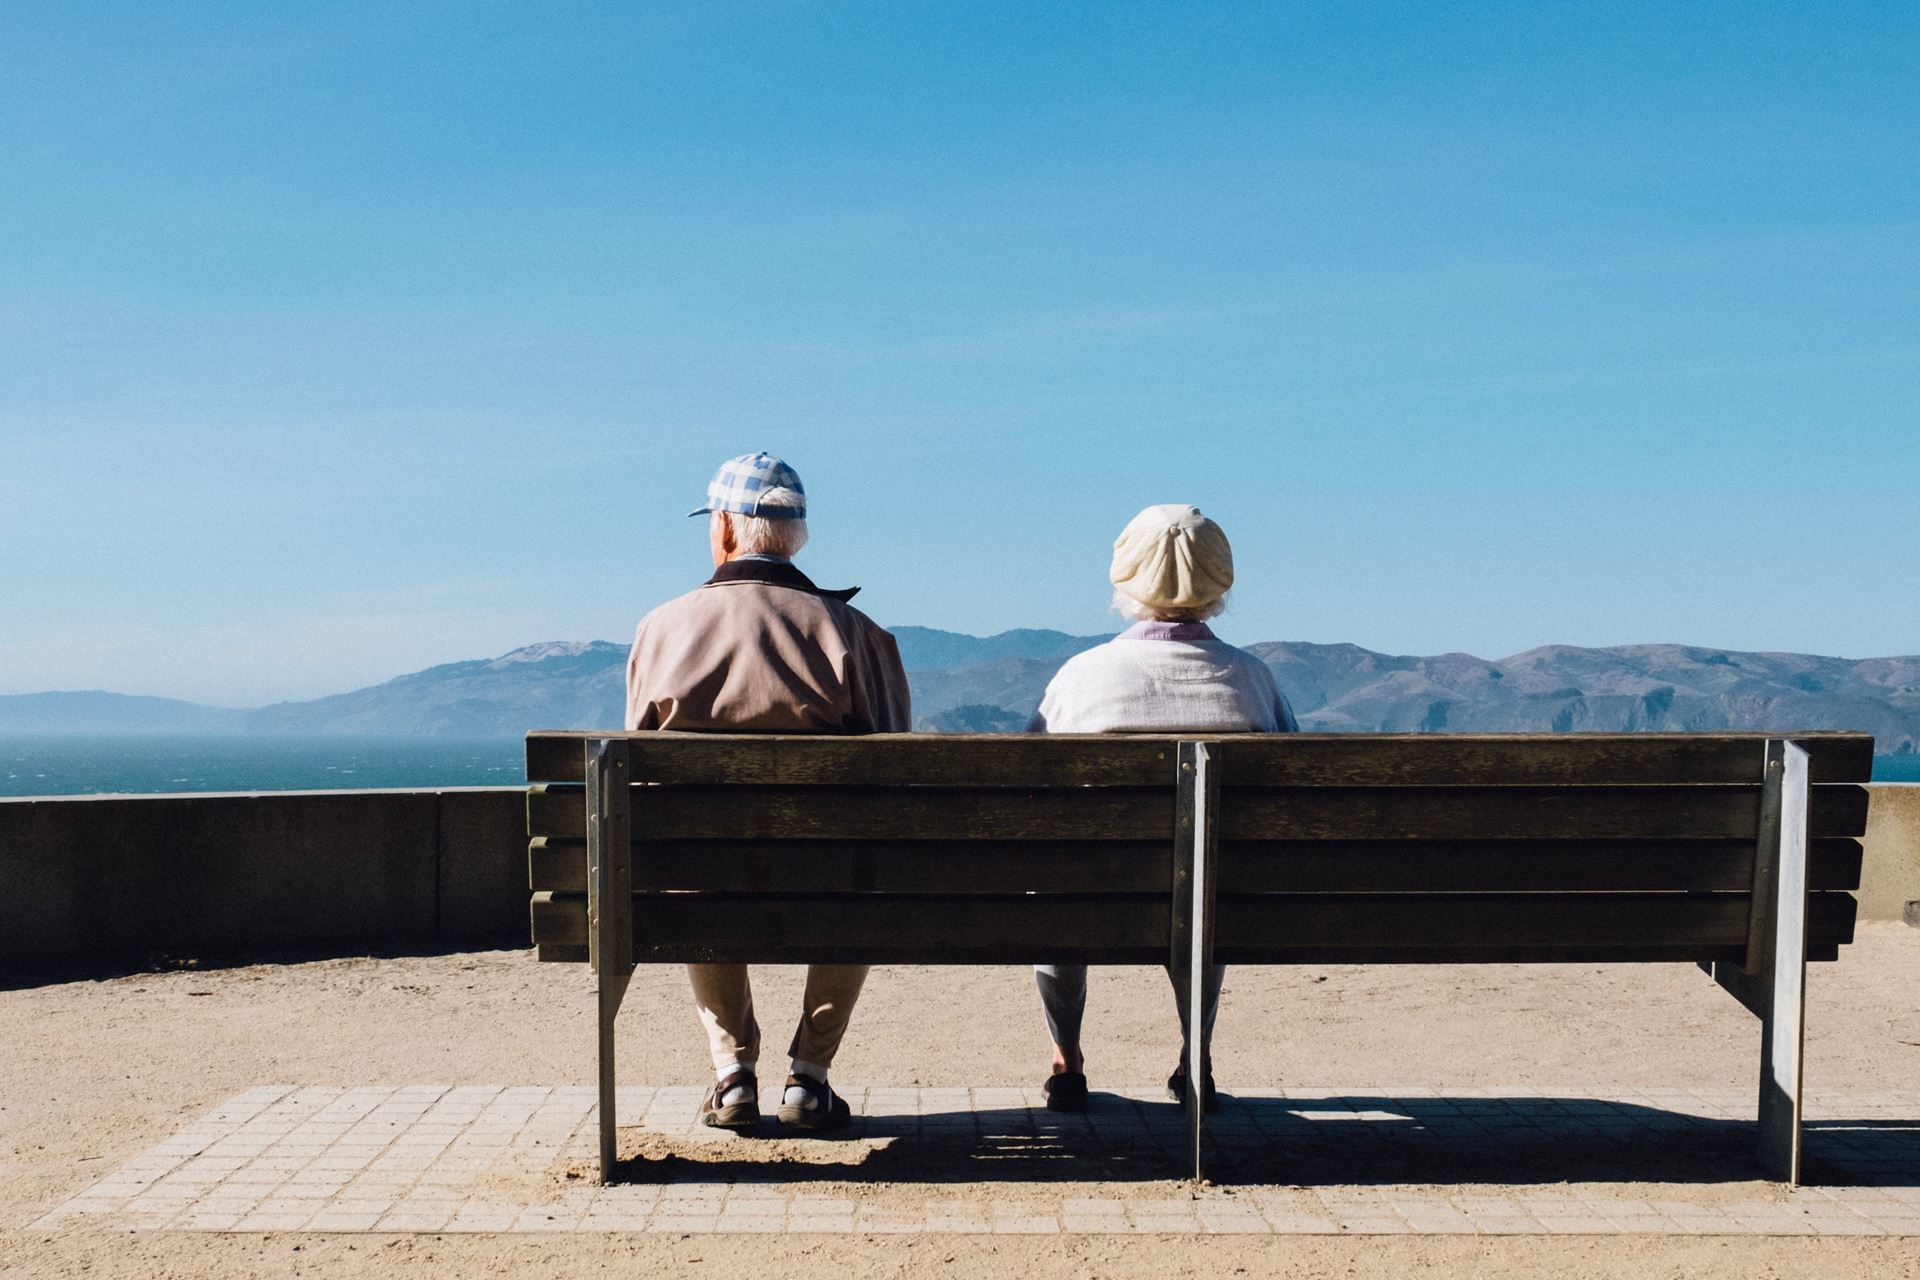 Two older people sitting on a bench looking out at the view